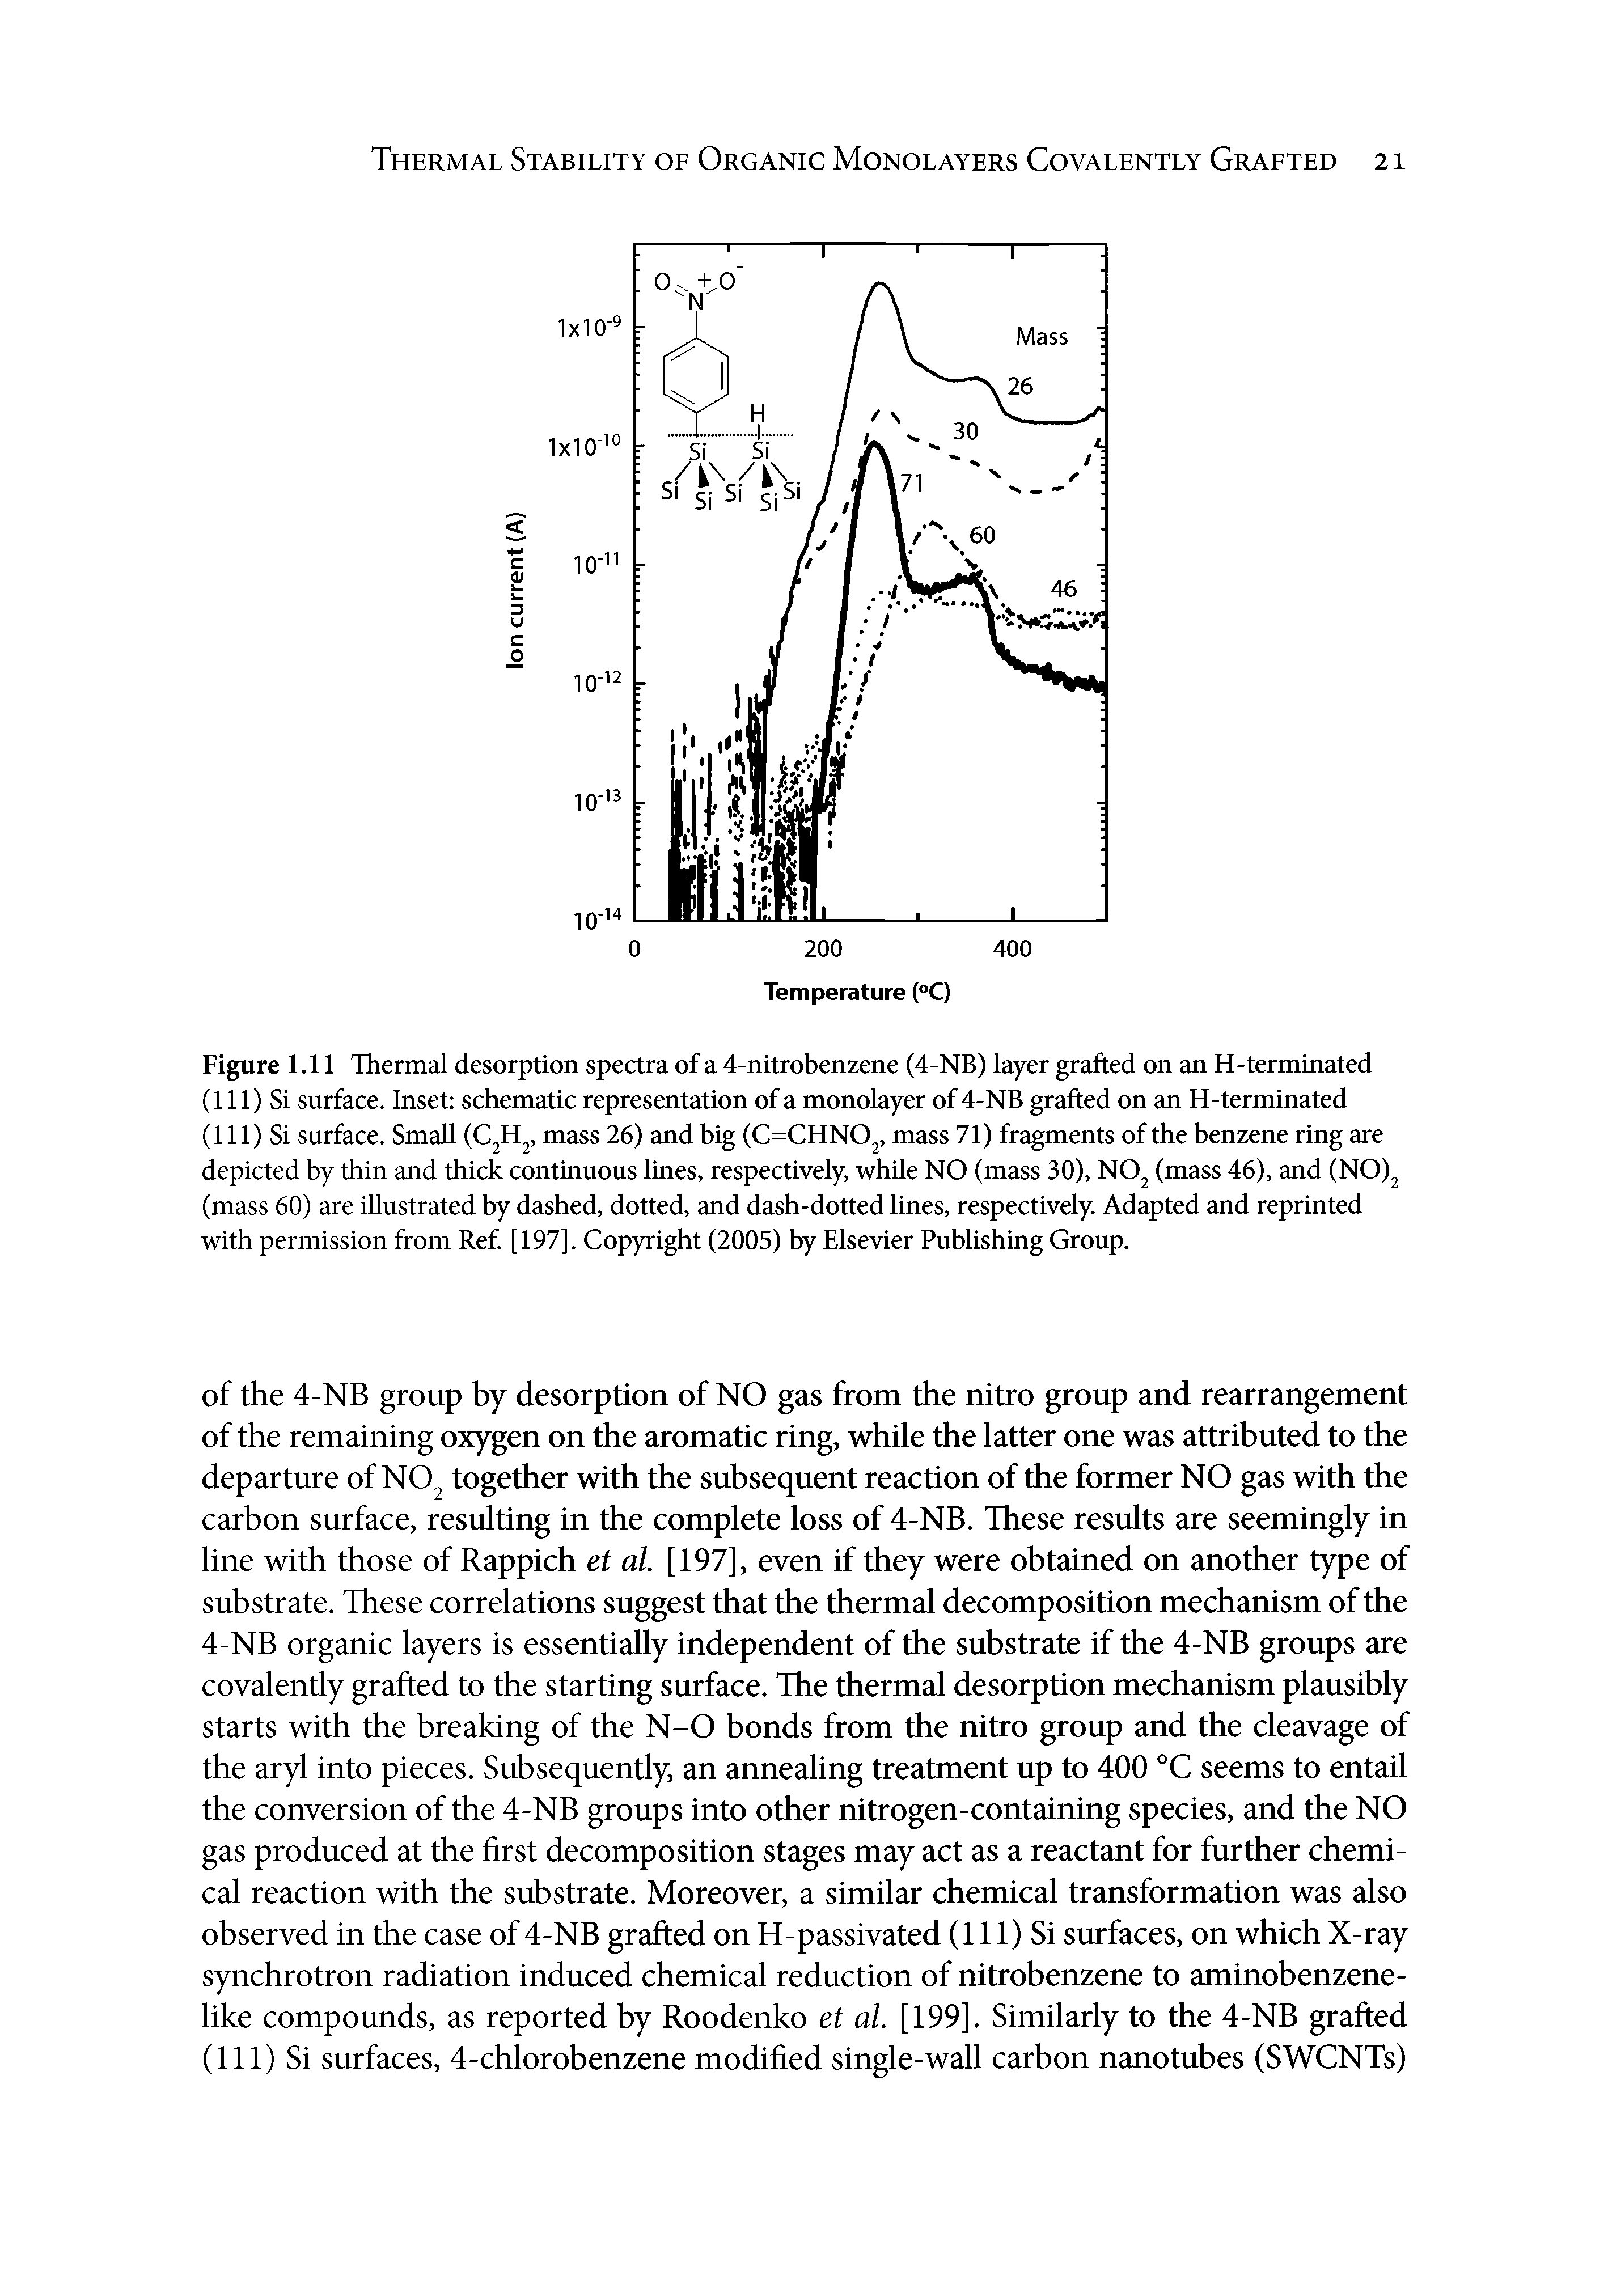 Figure 1.11 Thermal desorption spectra of a 4-nitrobenzene (4-NB) layer grafted on an H-terminated (111) Si surface. Inset schematic representation of a monolayer of 4-NB grafted on an H-terminated (111) Si surface. Small (C H, mass 26) and big (C=CHN02, mass 71) fragments of the benzene ring are depicted by thin and thick continuous lines, respectively, while NO (mass 30), NO (mass 46), and (NO) (mass 60) are illustrated by dashed, dotted, and dash-dotted lines, respectively. Adapted and reprinted with permission from Ref. [197]. Copyright (2005) by Elsevier Publishing Group.